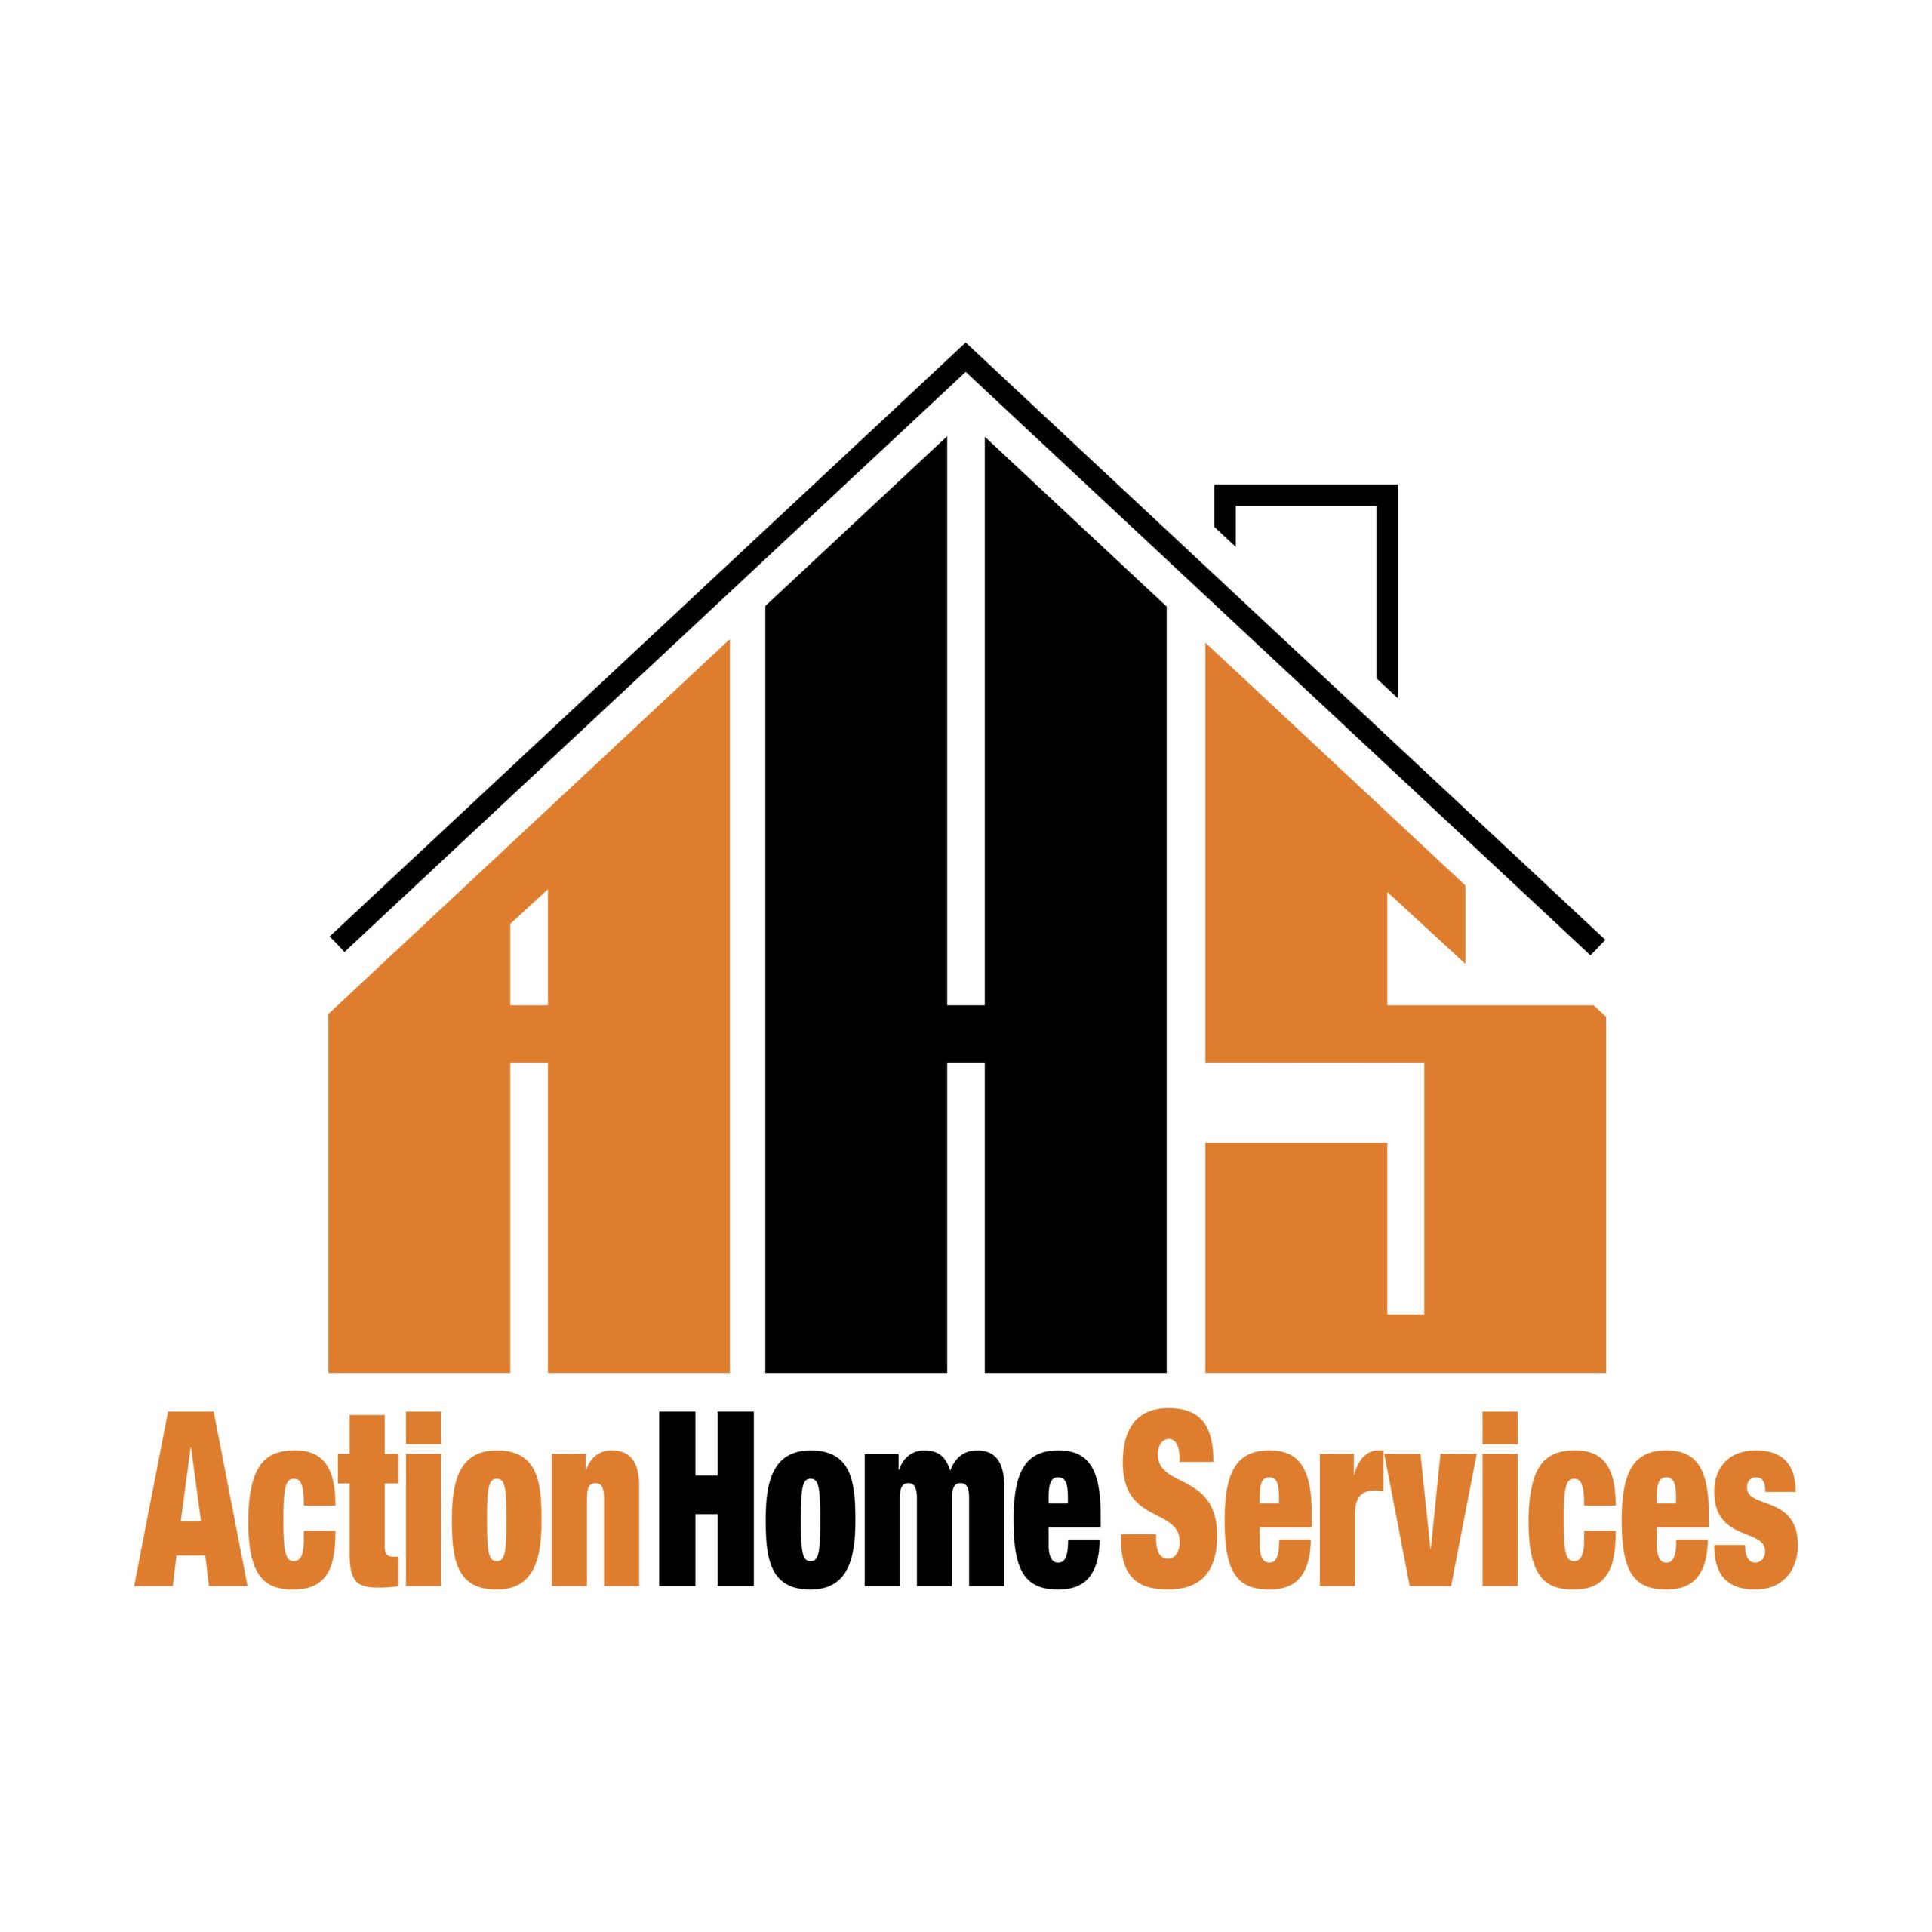 Action Home Services Inc  Decks, Fences, Railings, Patios, Sheds $(in_location),  Interlock/Driveway,  Swimming Pool/Spa,  Vaughan,Ontario